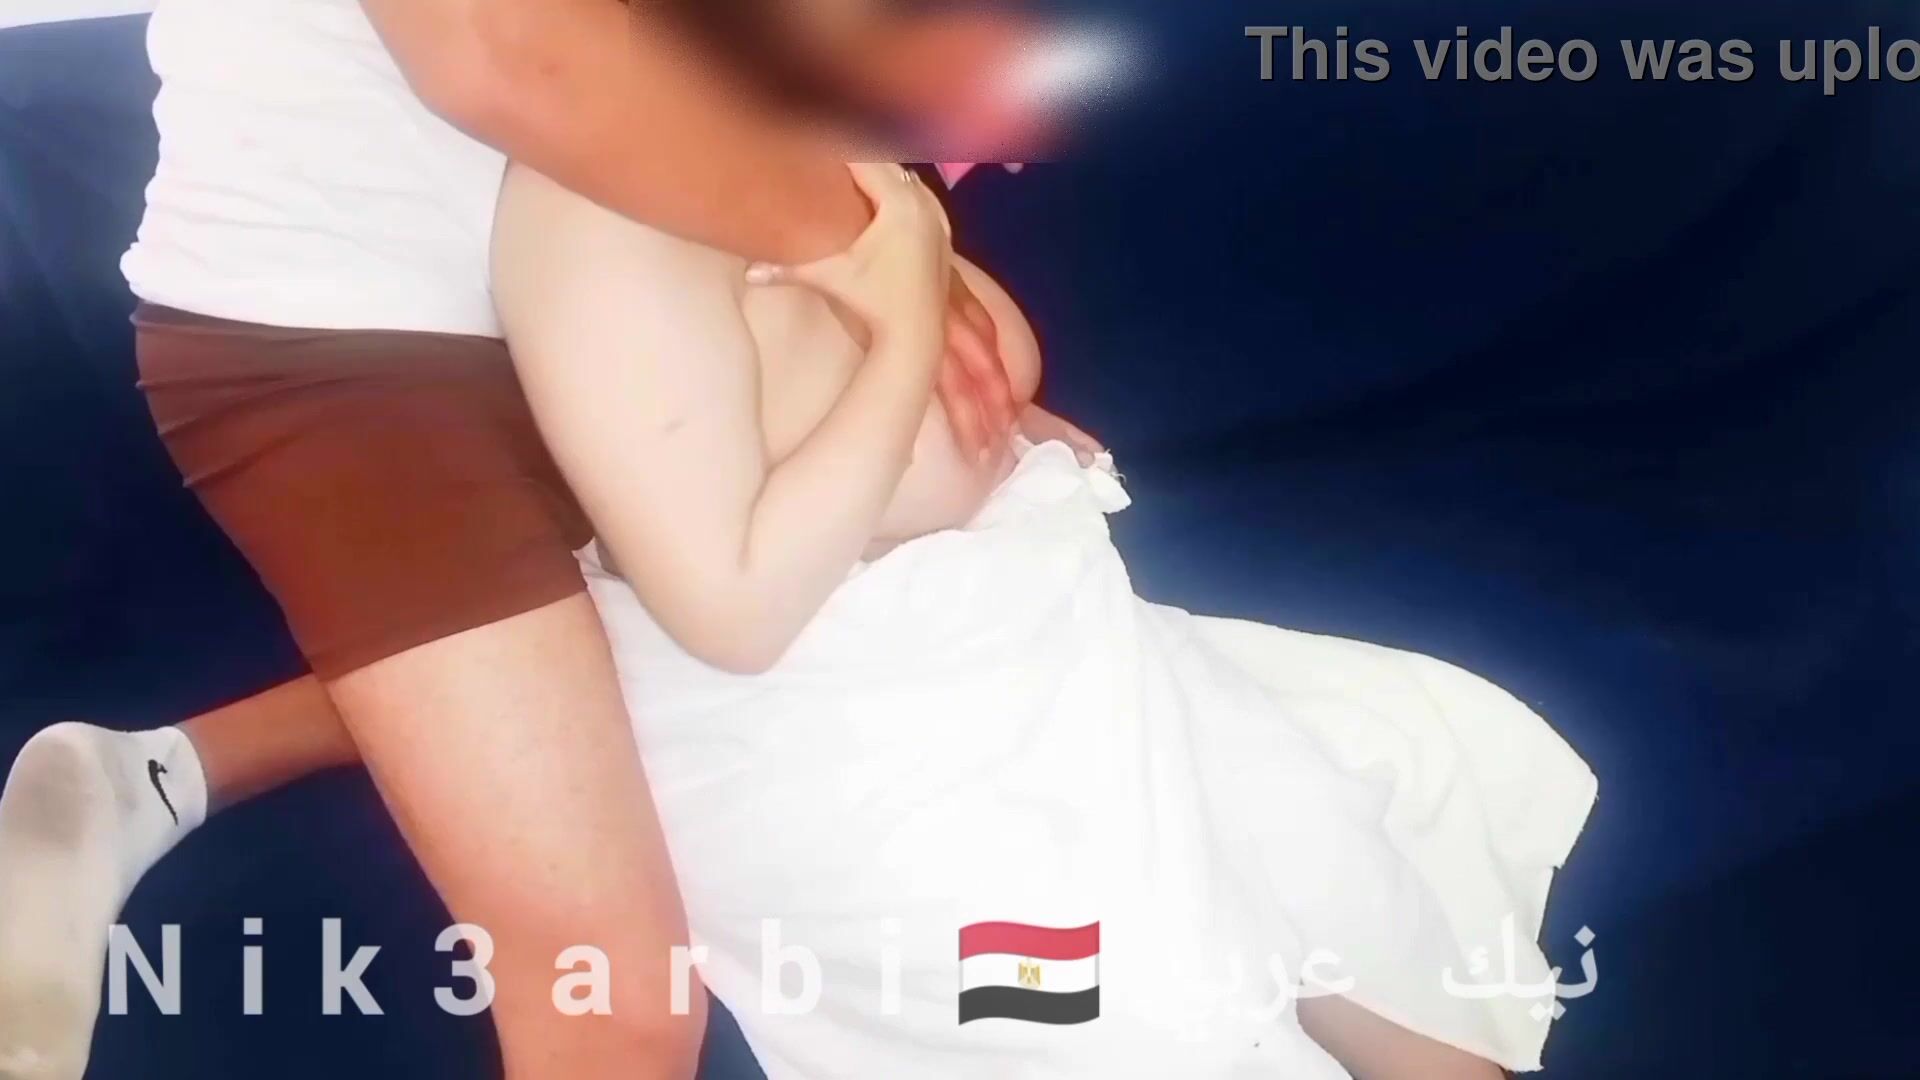 An Egyptian boy doing a massage and feeling on the tits of an adult